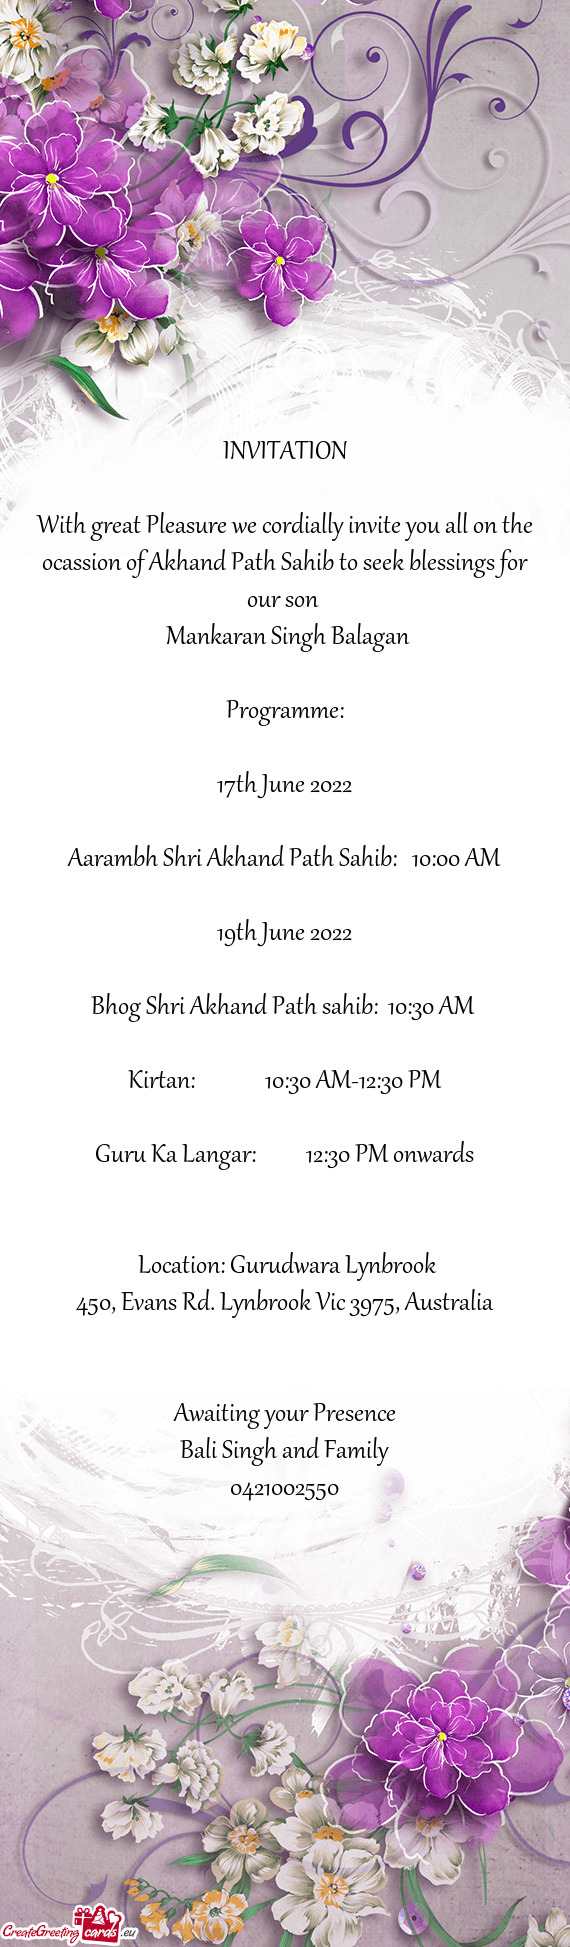 With great Pleasure we cordially invite you all on the ocassion of Akhand Path Sahib to seek blessin